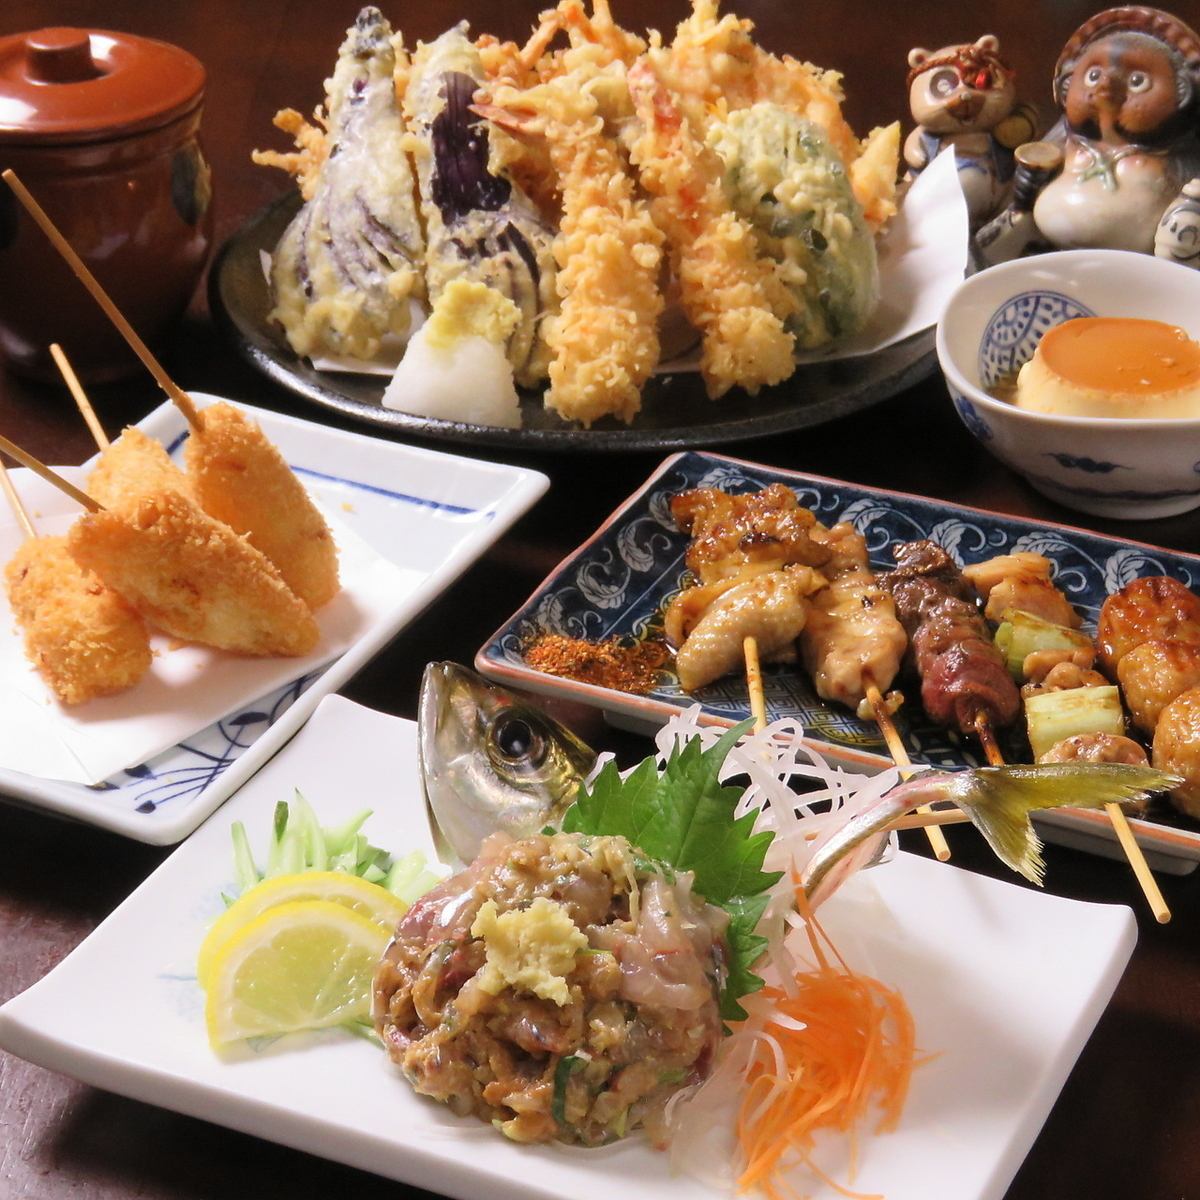 29 years near Tokiwadai Station! A family restaurant where you can enjoy both Japanese and Western dishes!